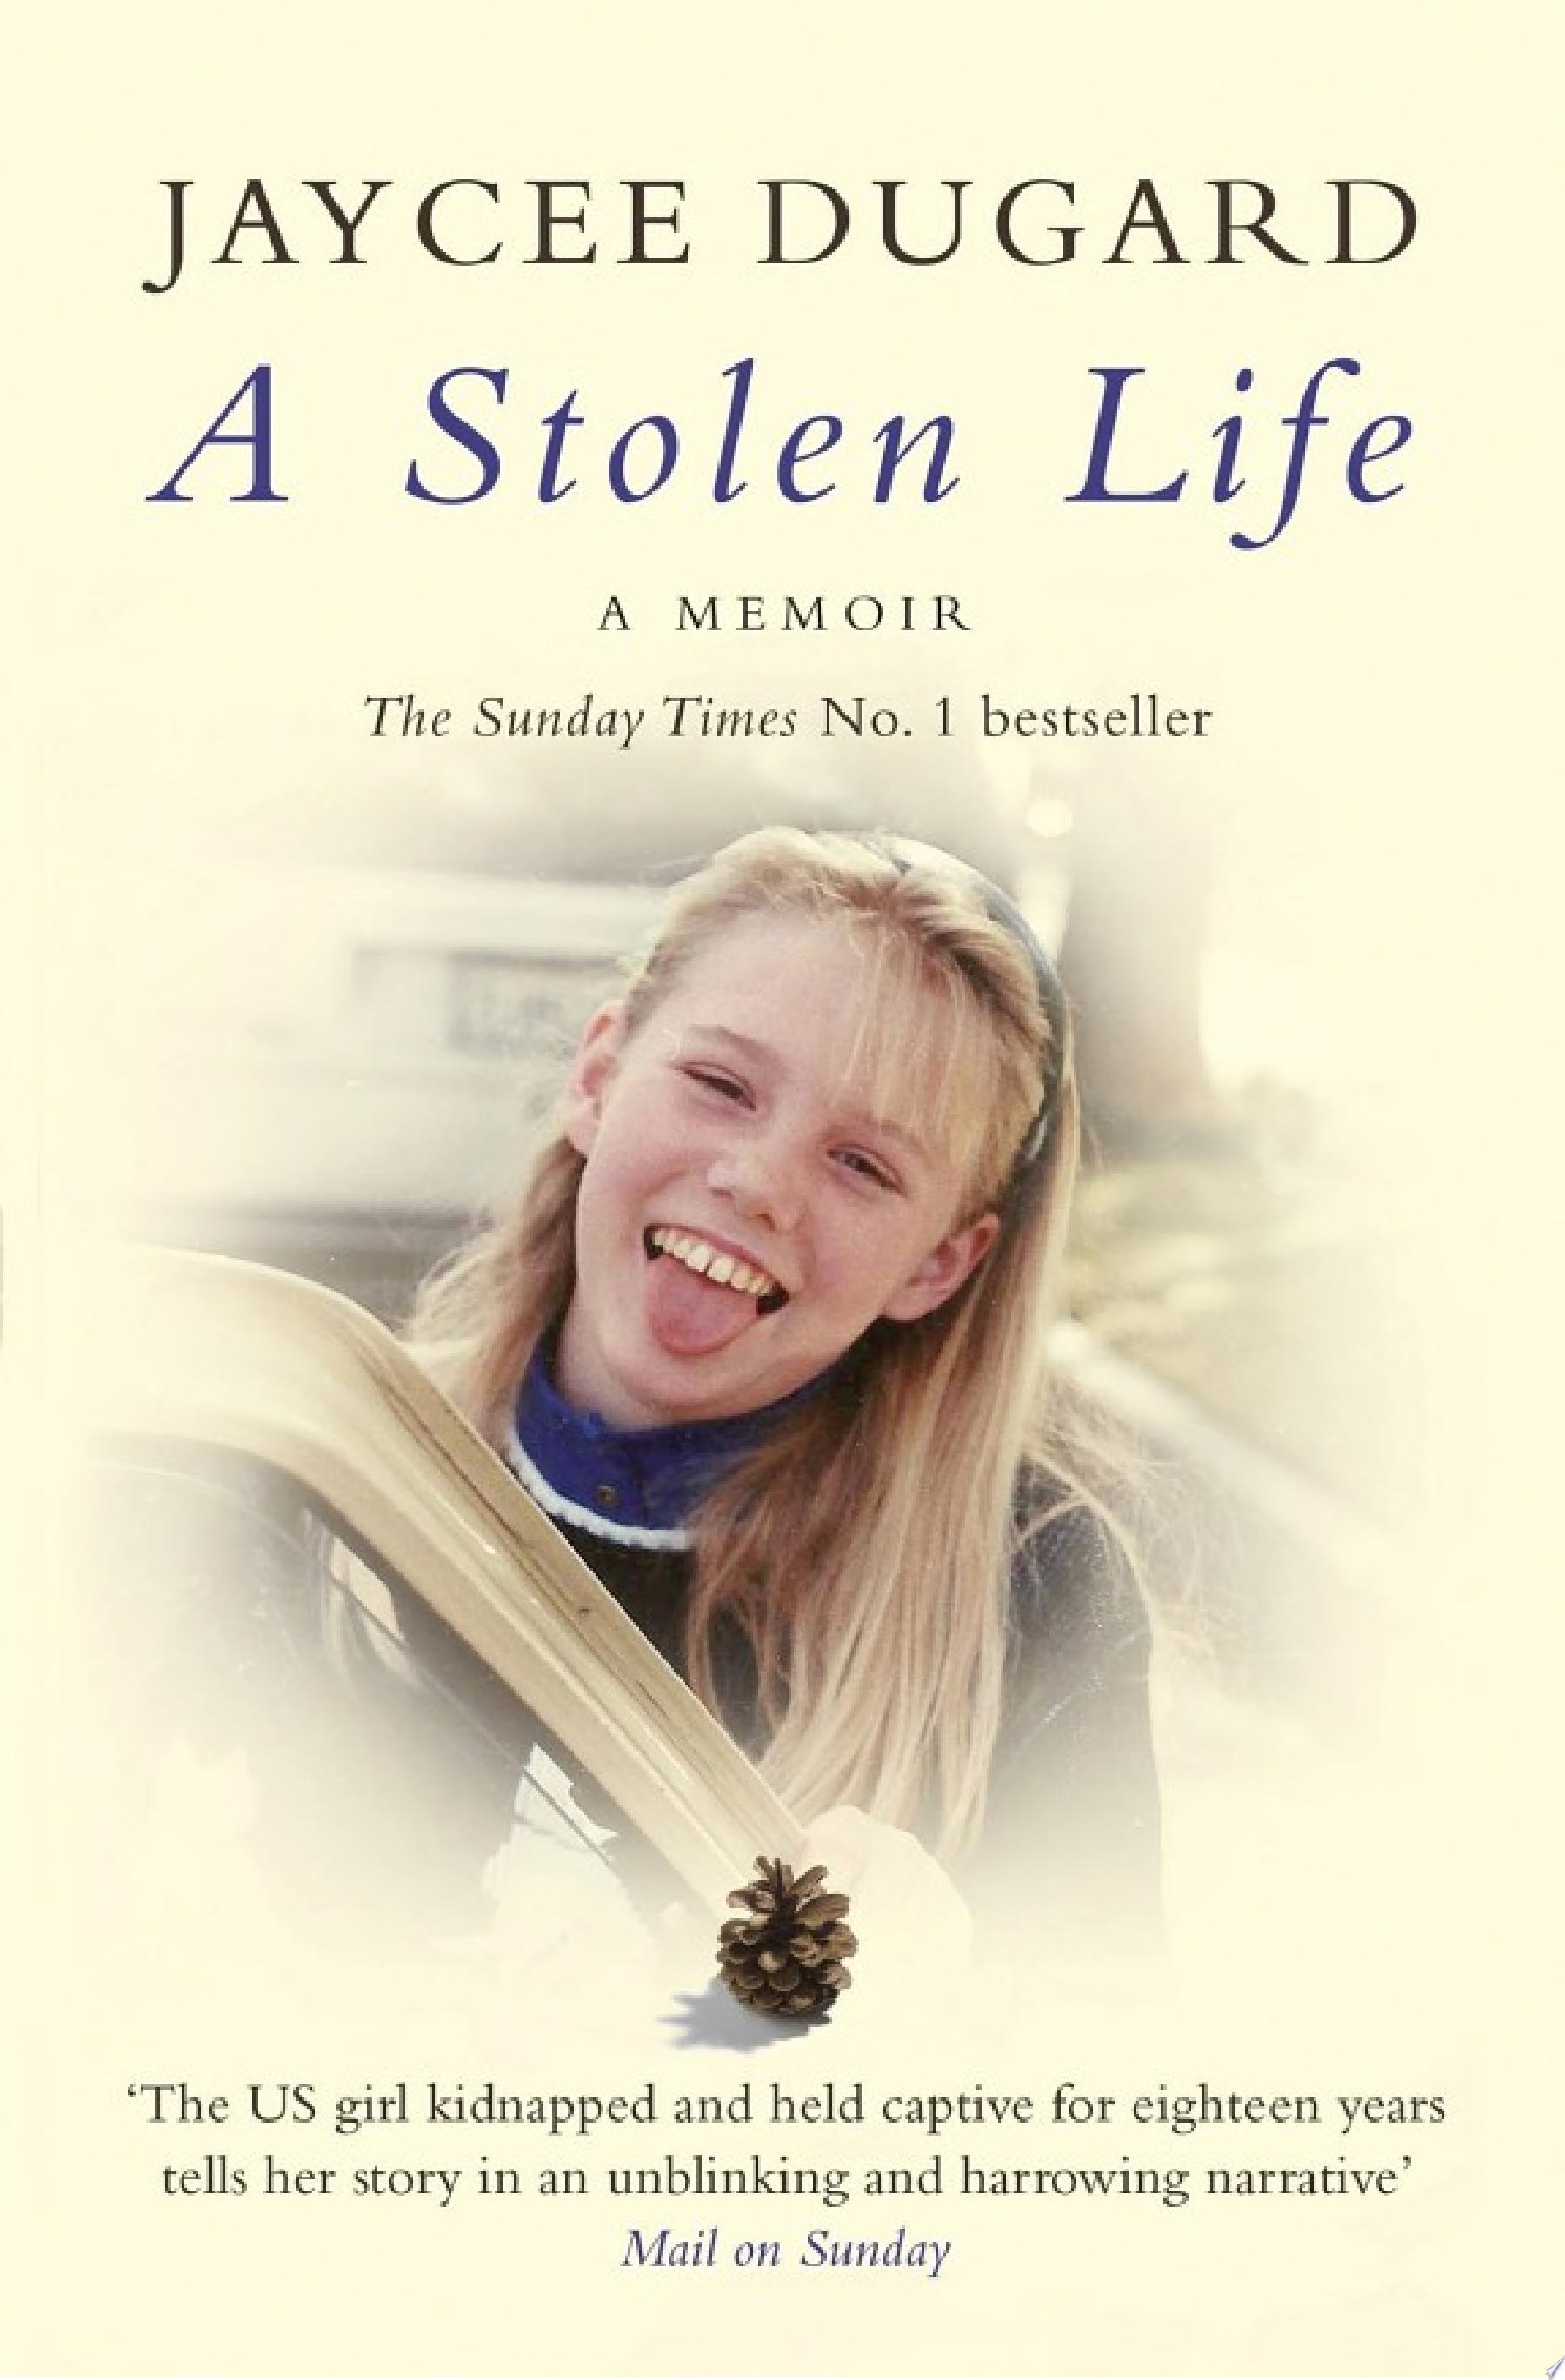 Image for "A Stolen Life"